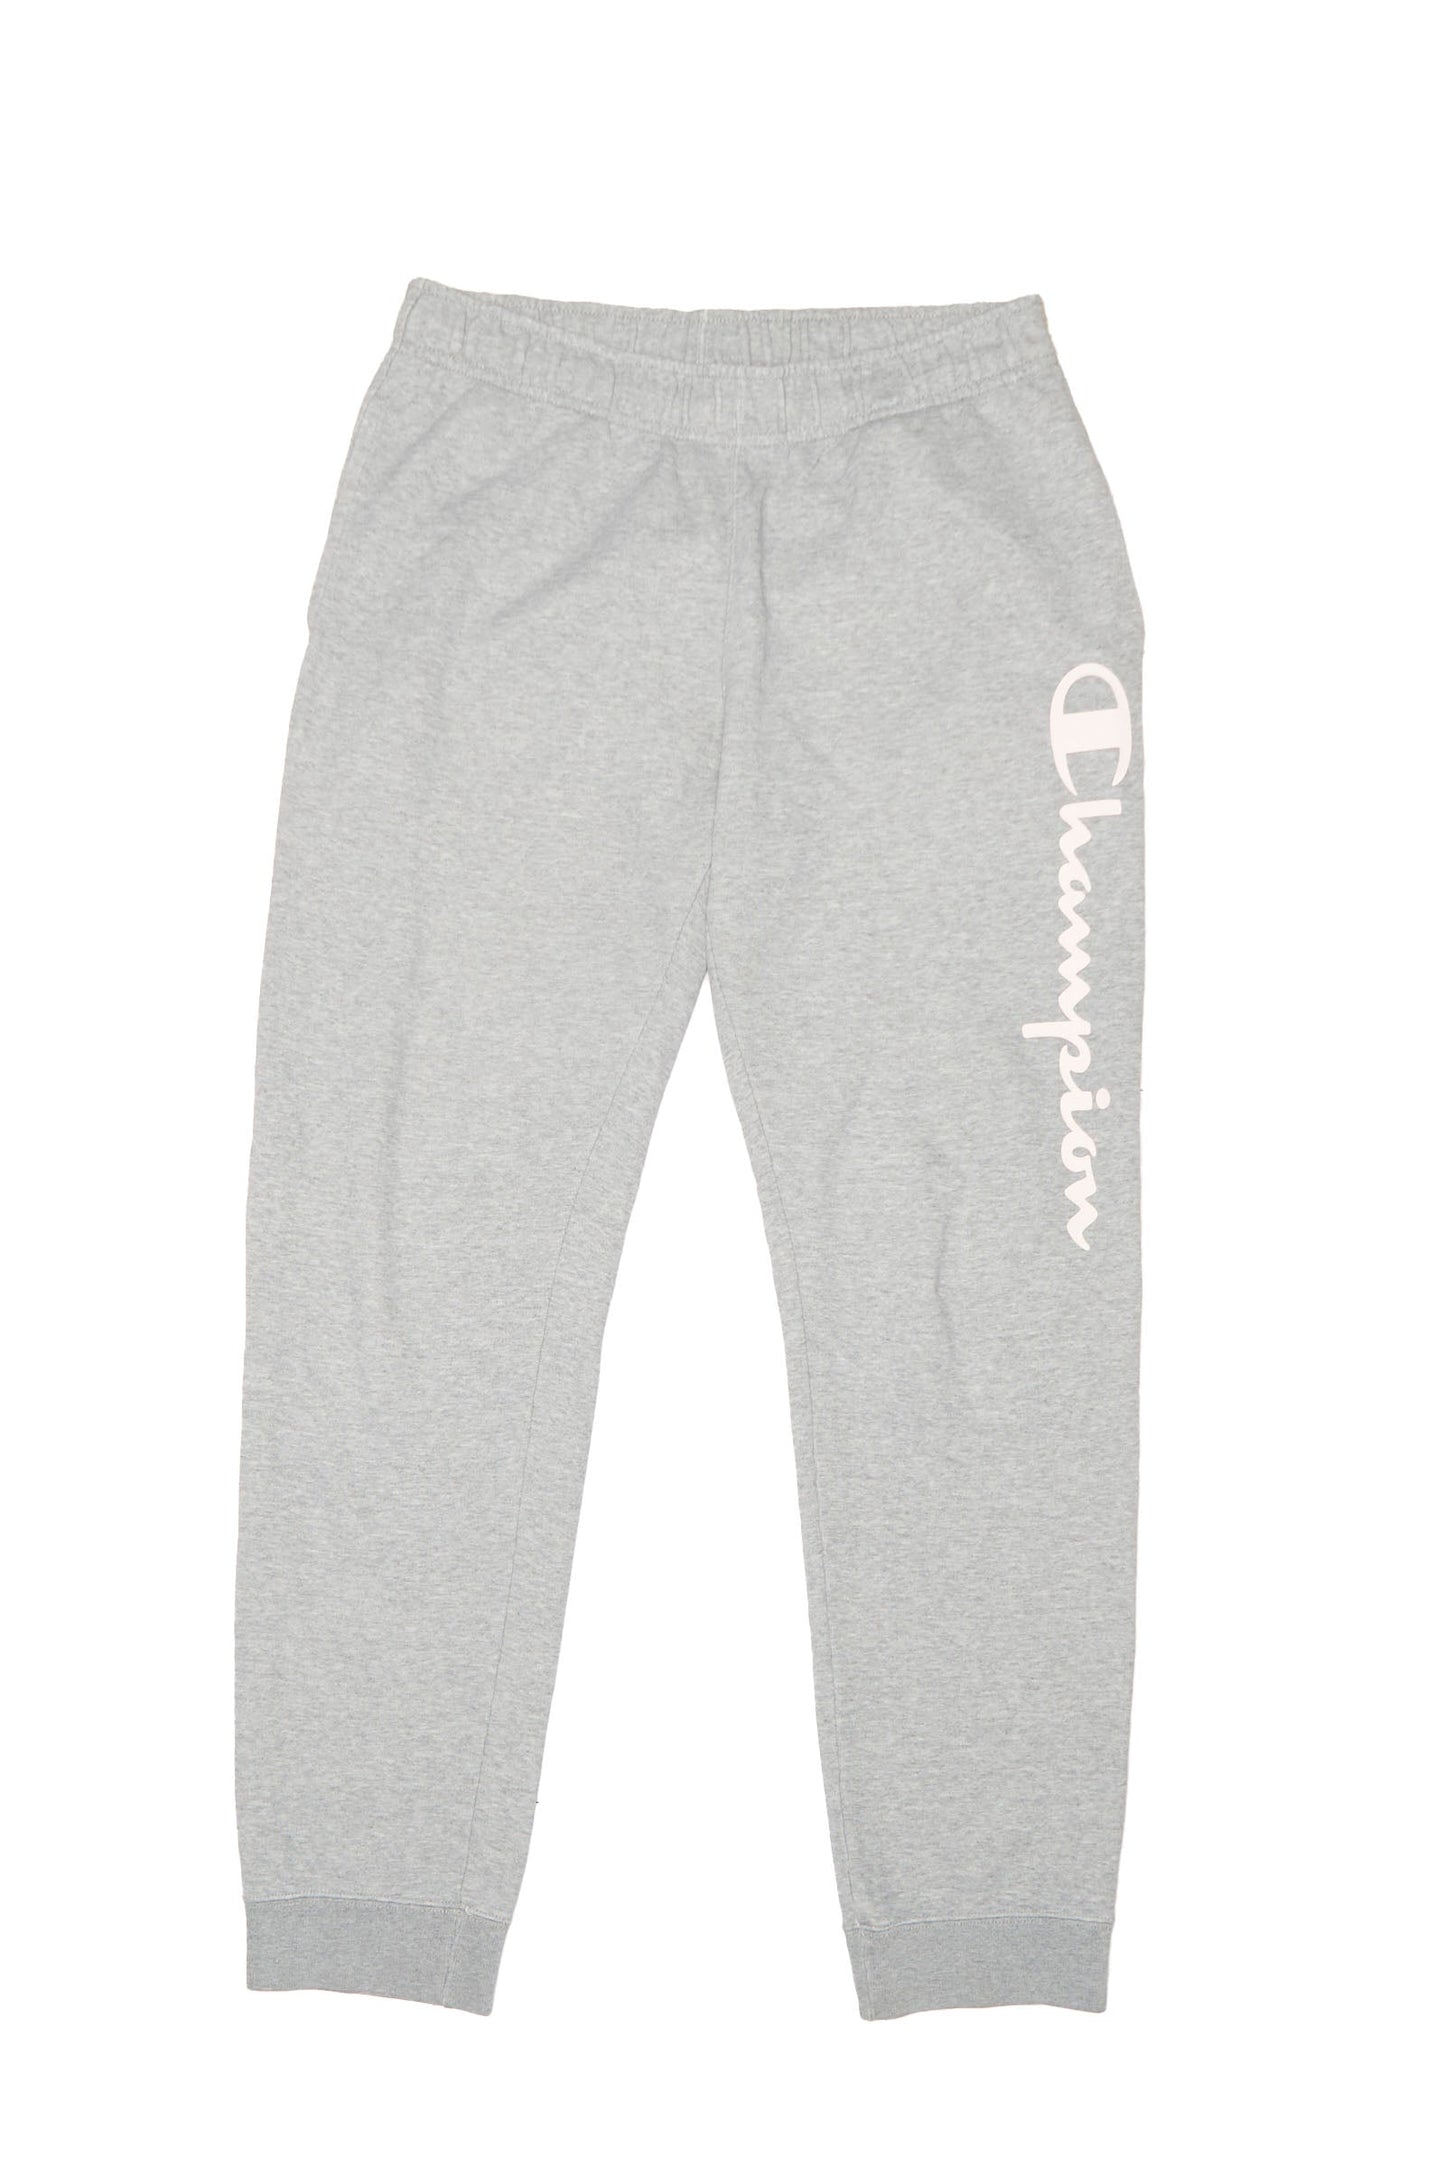 Mens Champion Spellout Print Cuffed Joggers - M